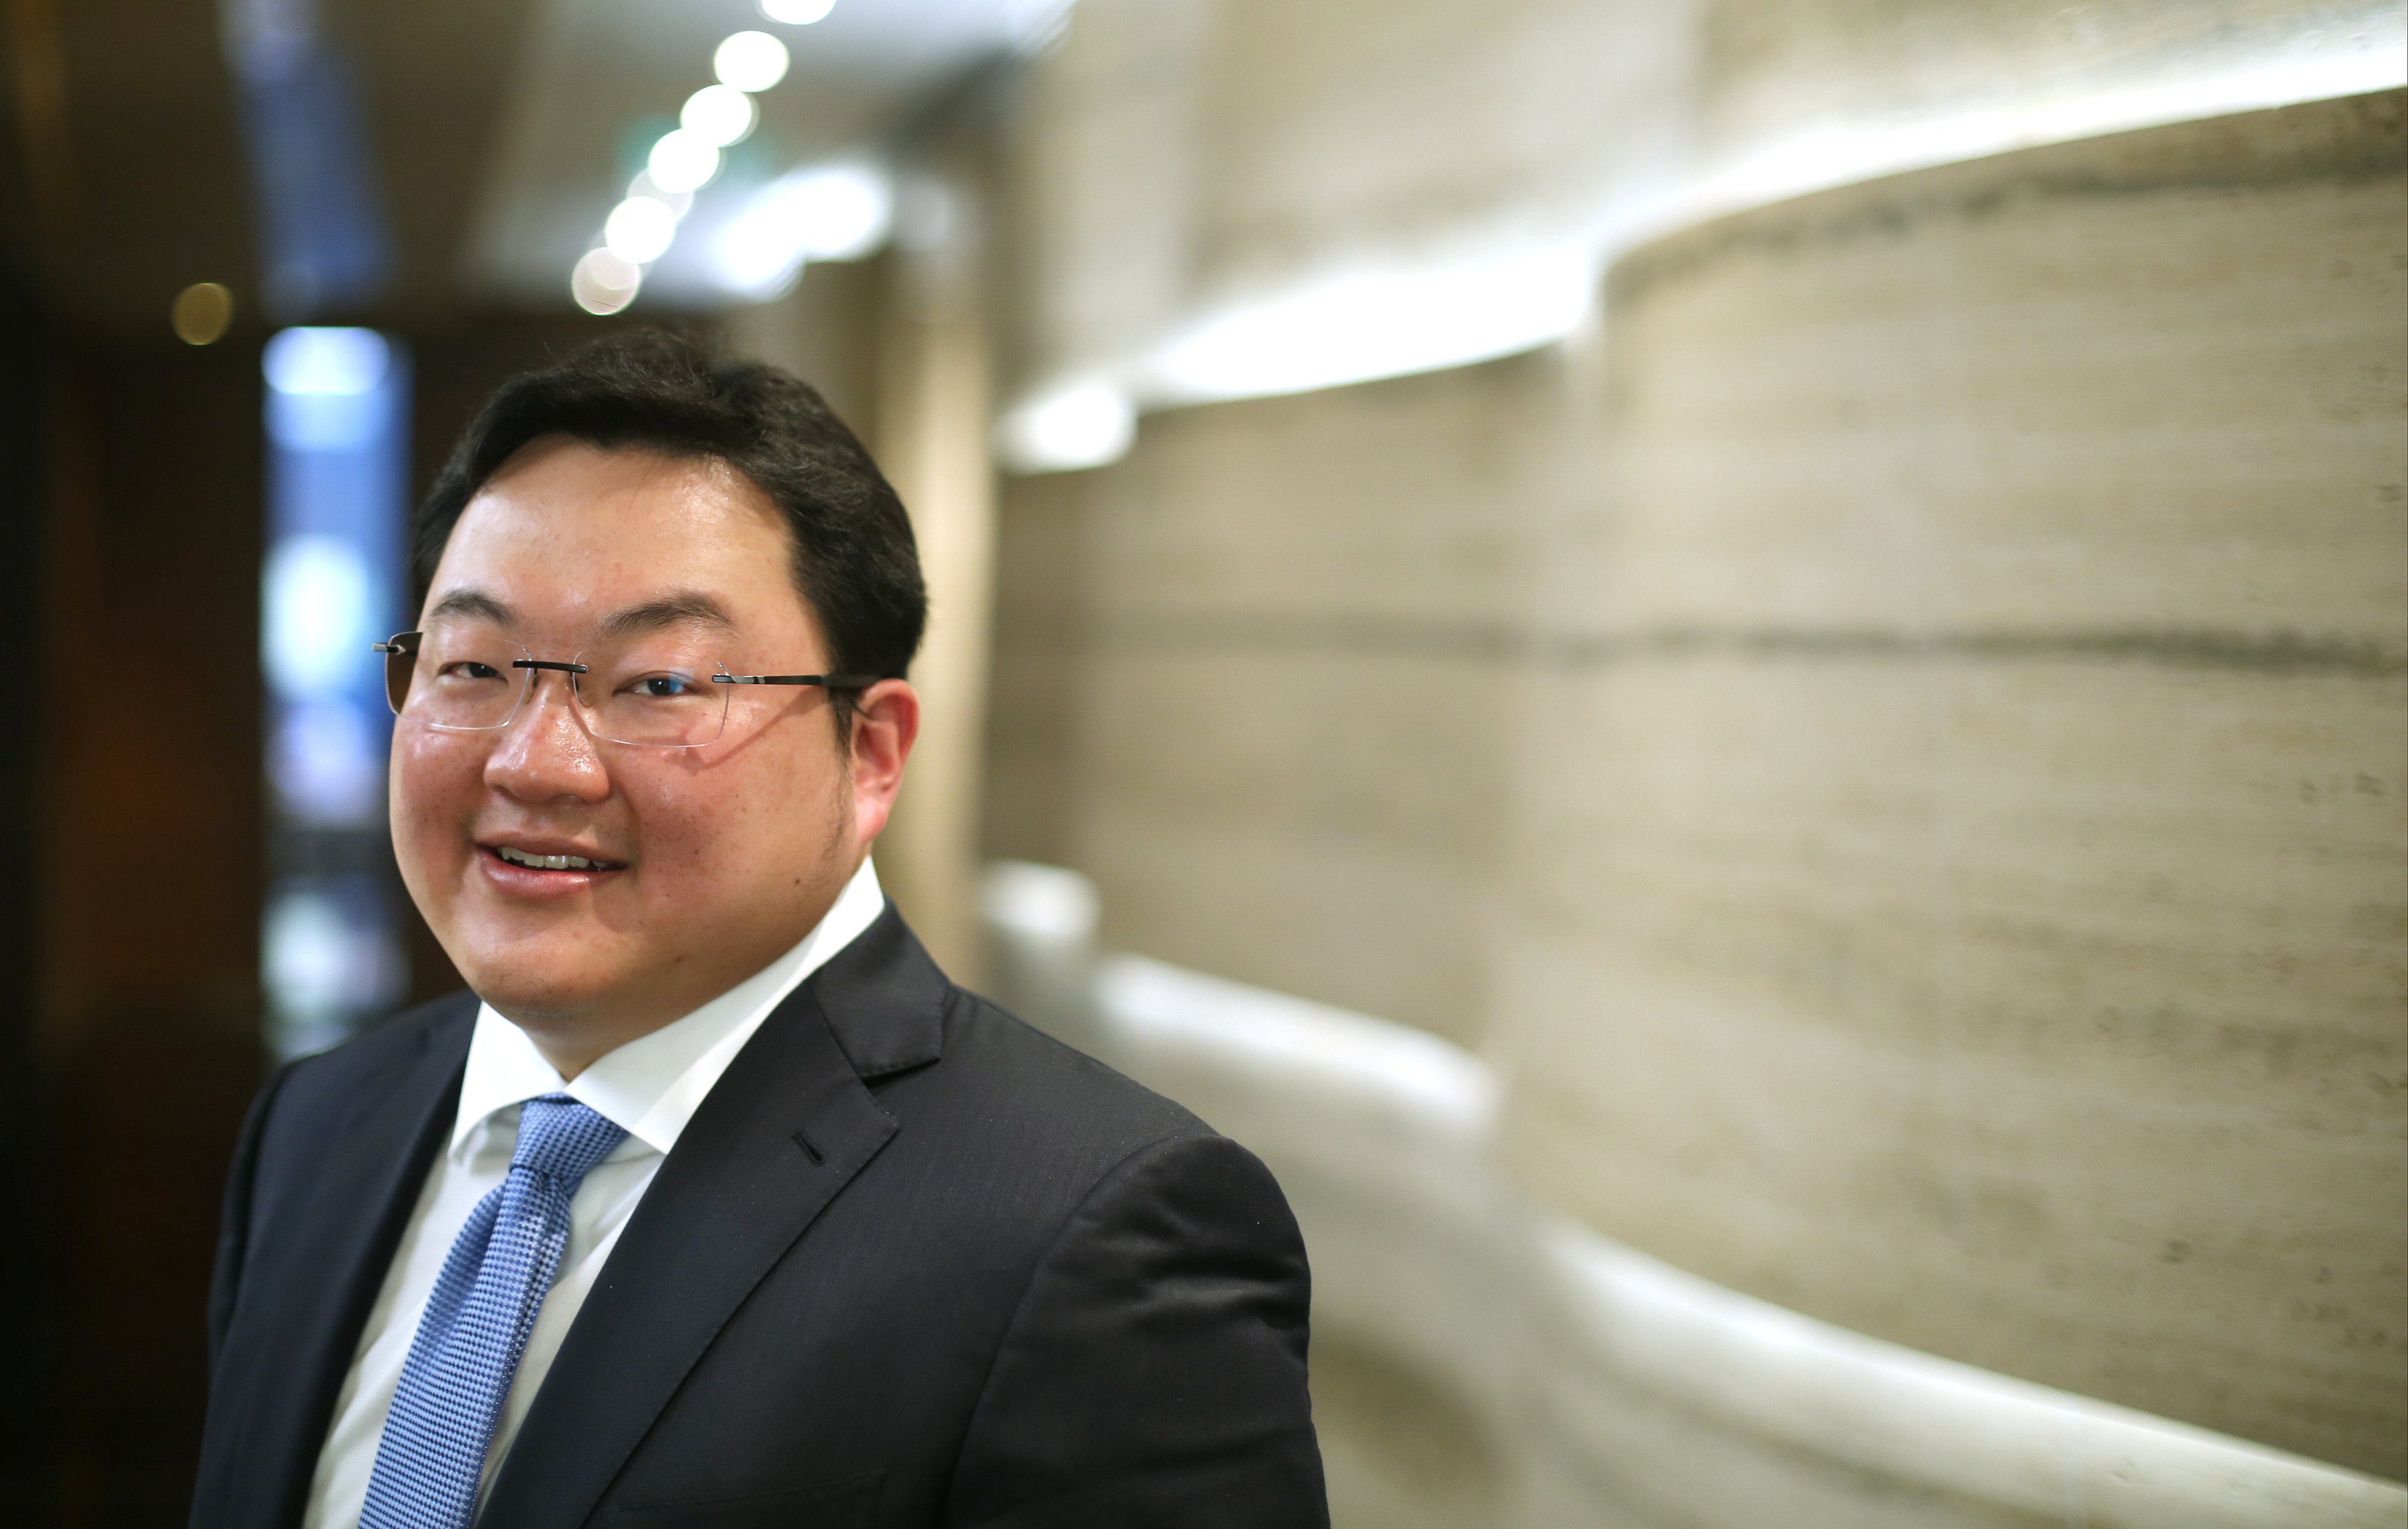 The Malaysian government said it is working on expediting the extradition of fugitive businessman Jho Low Photo: SCMP